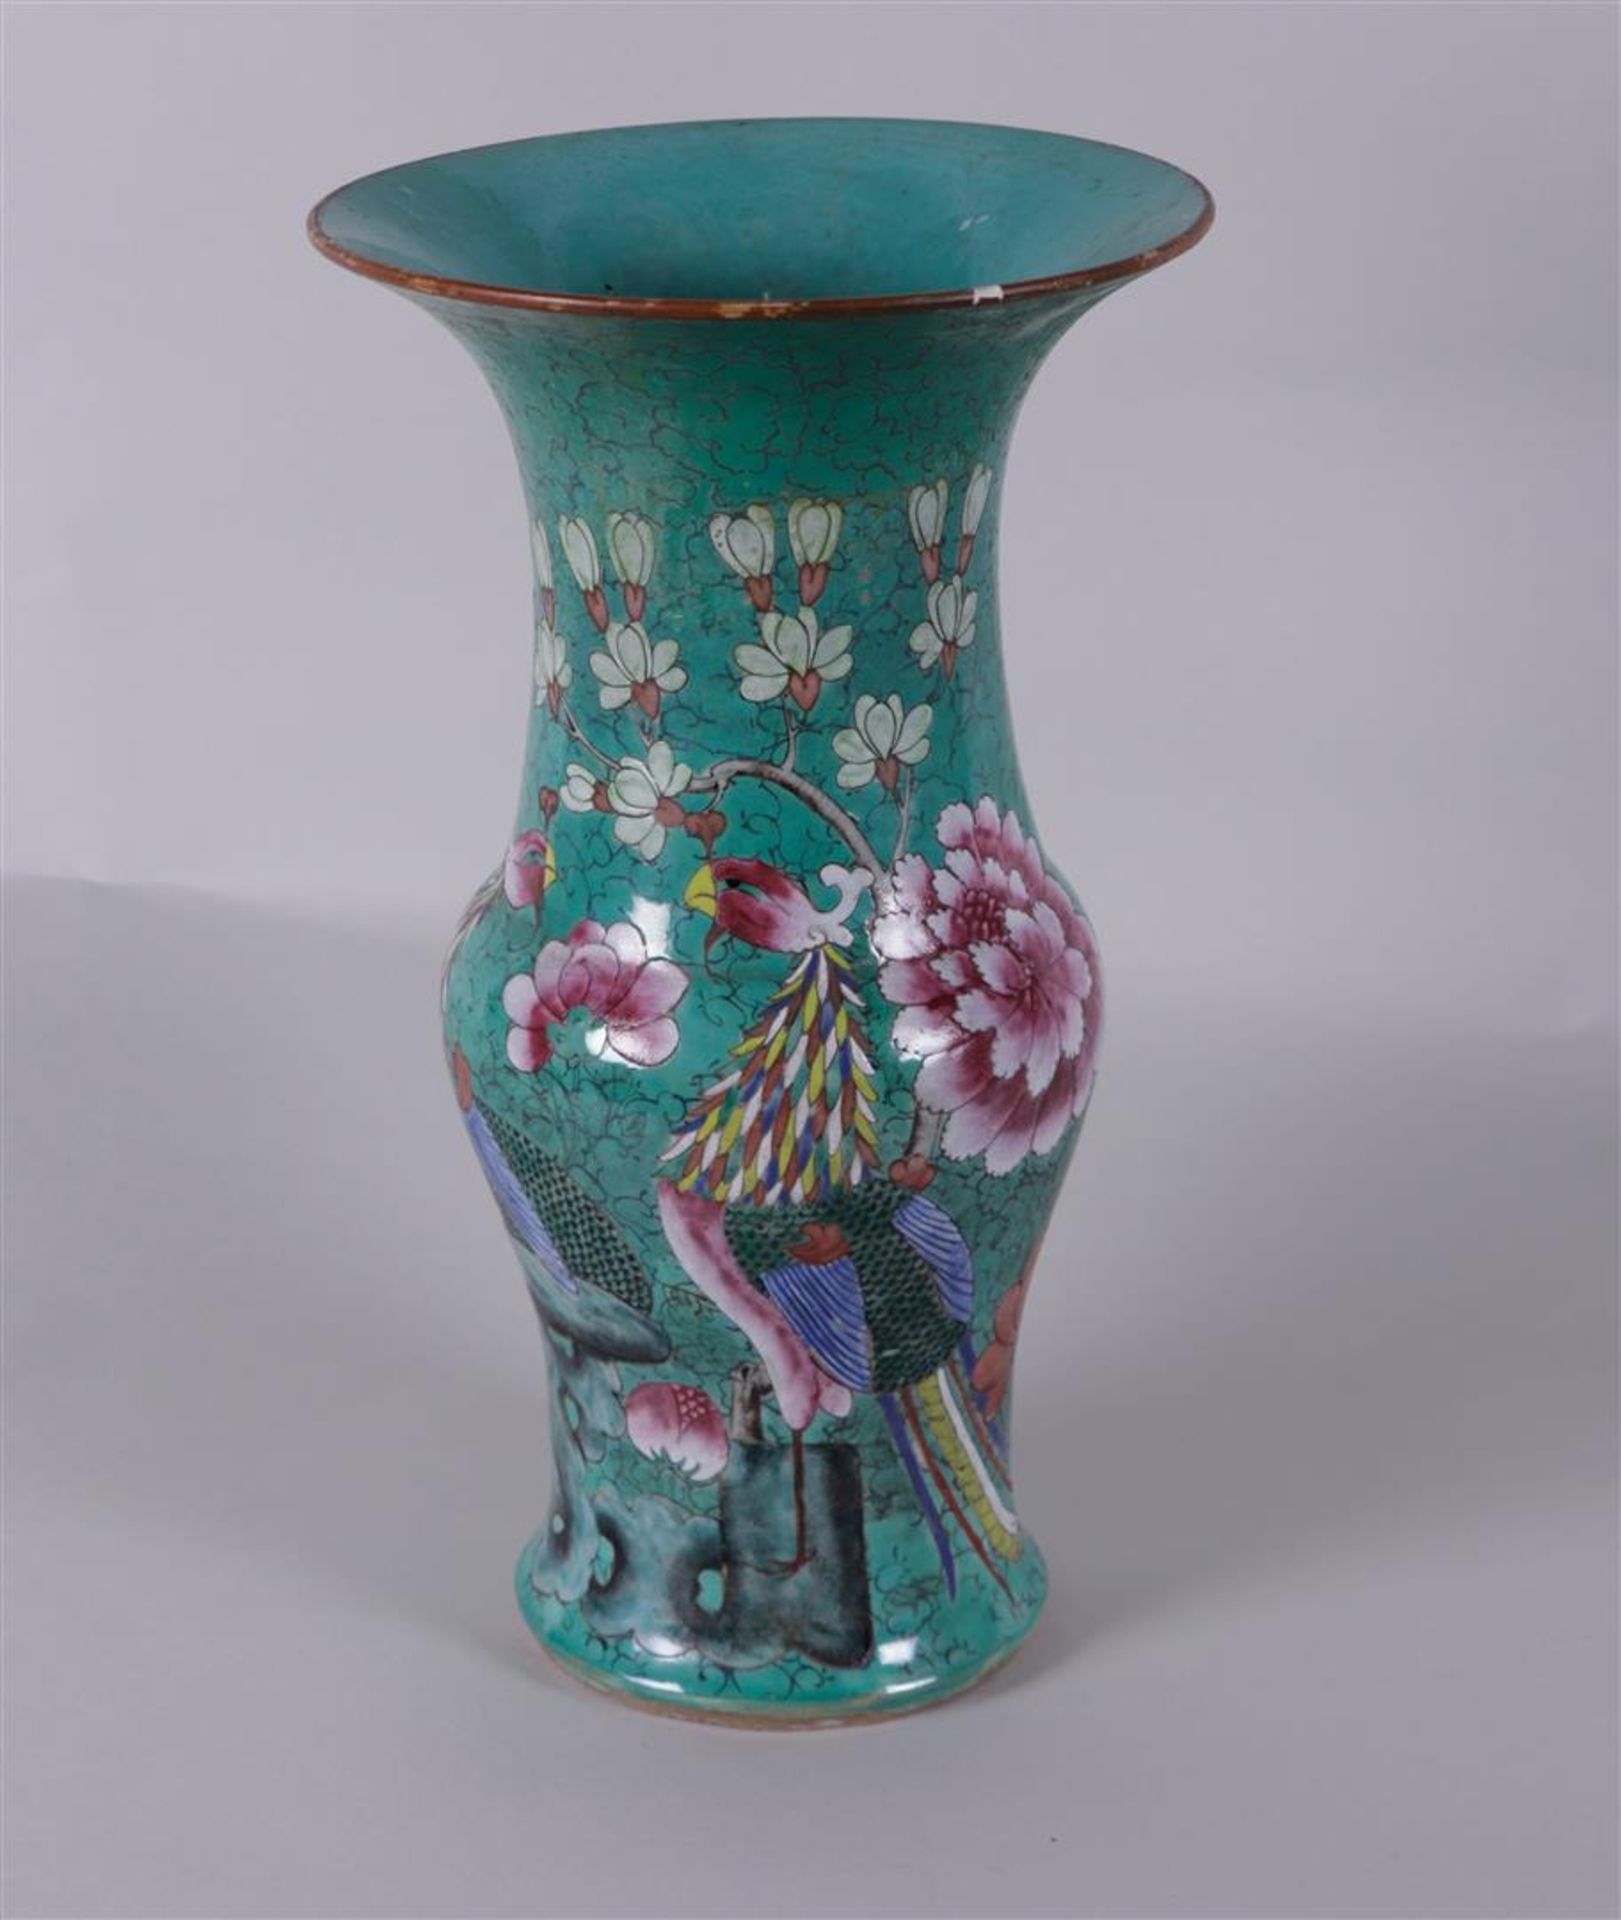 A large family rose collar vase decorated with flowers and a phoenix. China, 19th century.
H. 41 cm.